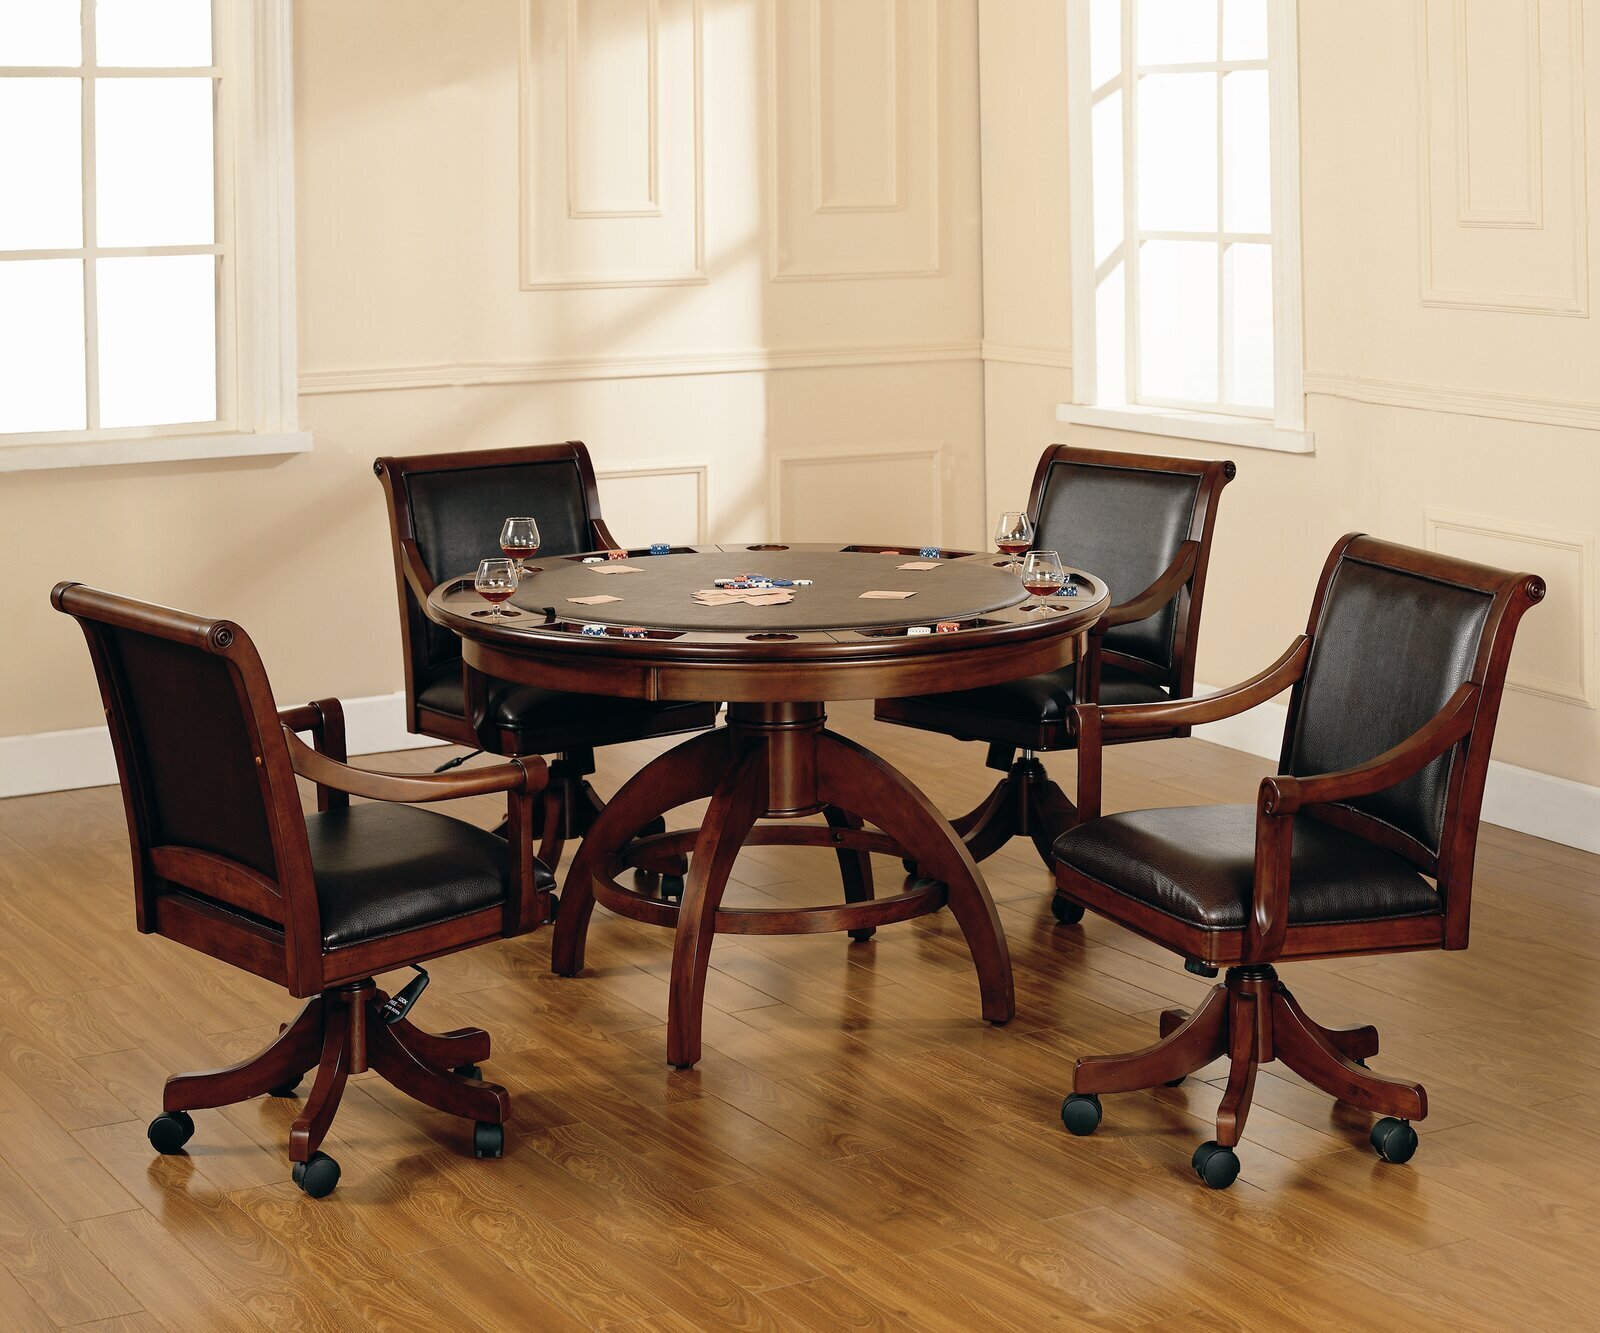 Dark Wood Table With 4 Chairs Complete With Casters  